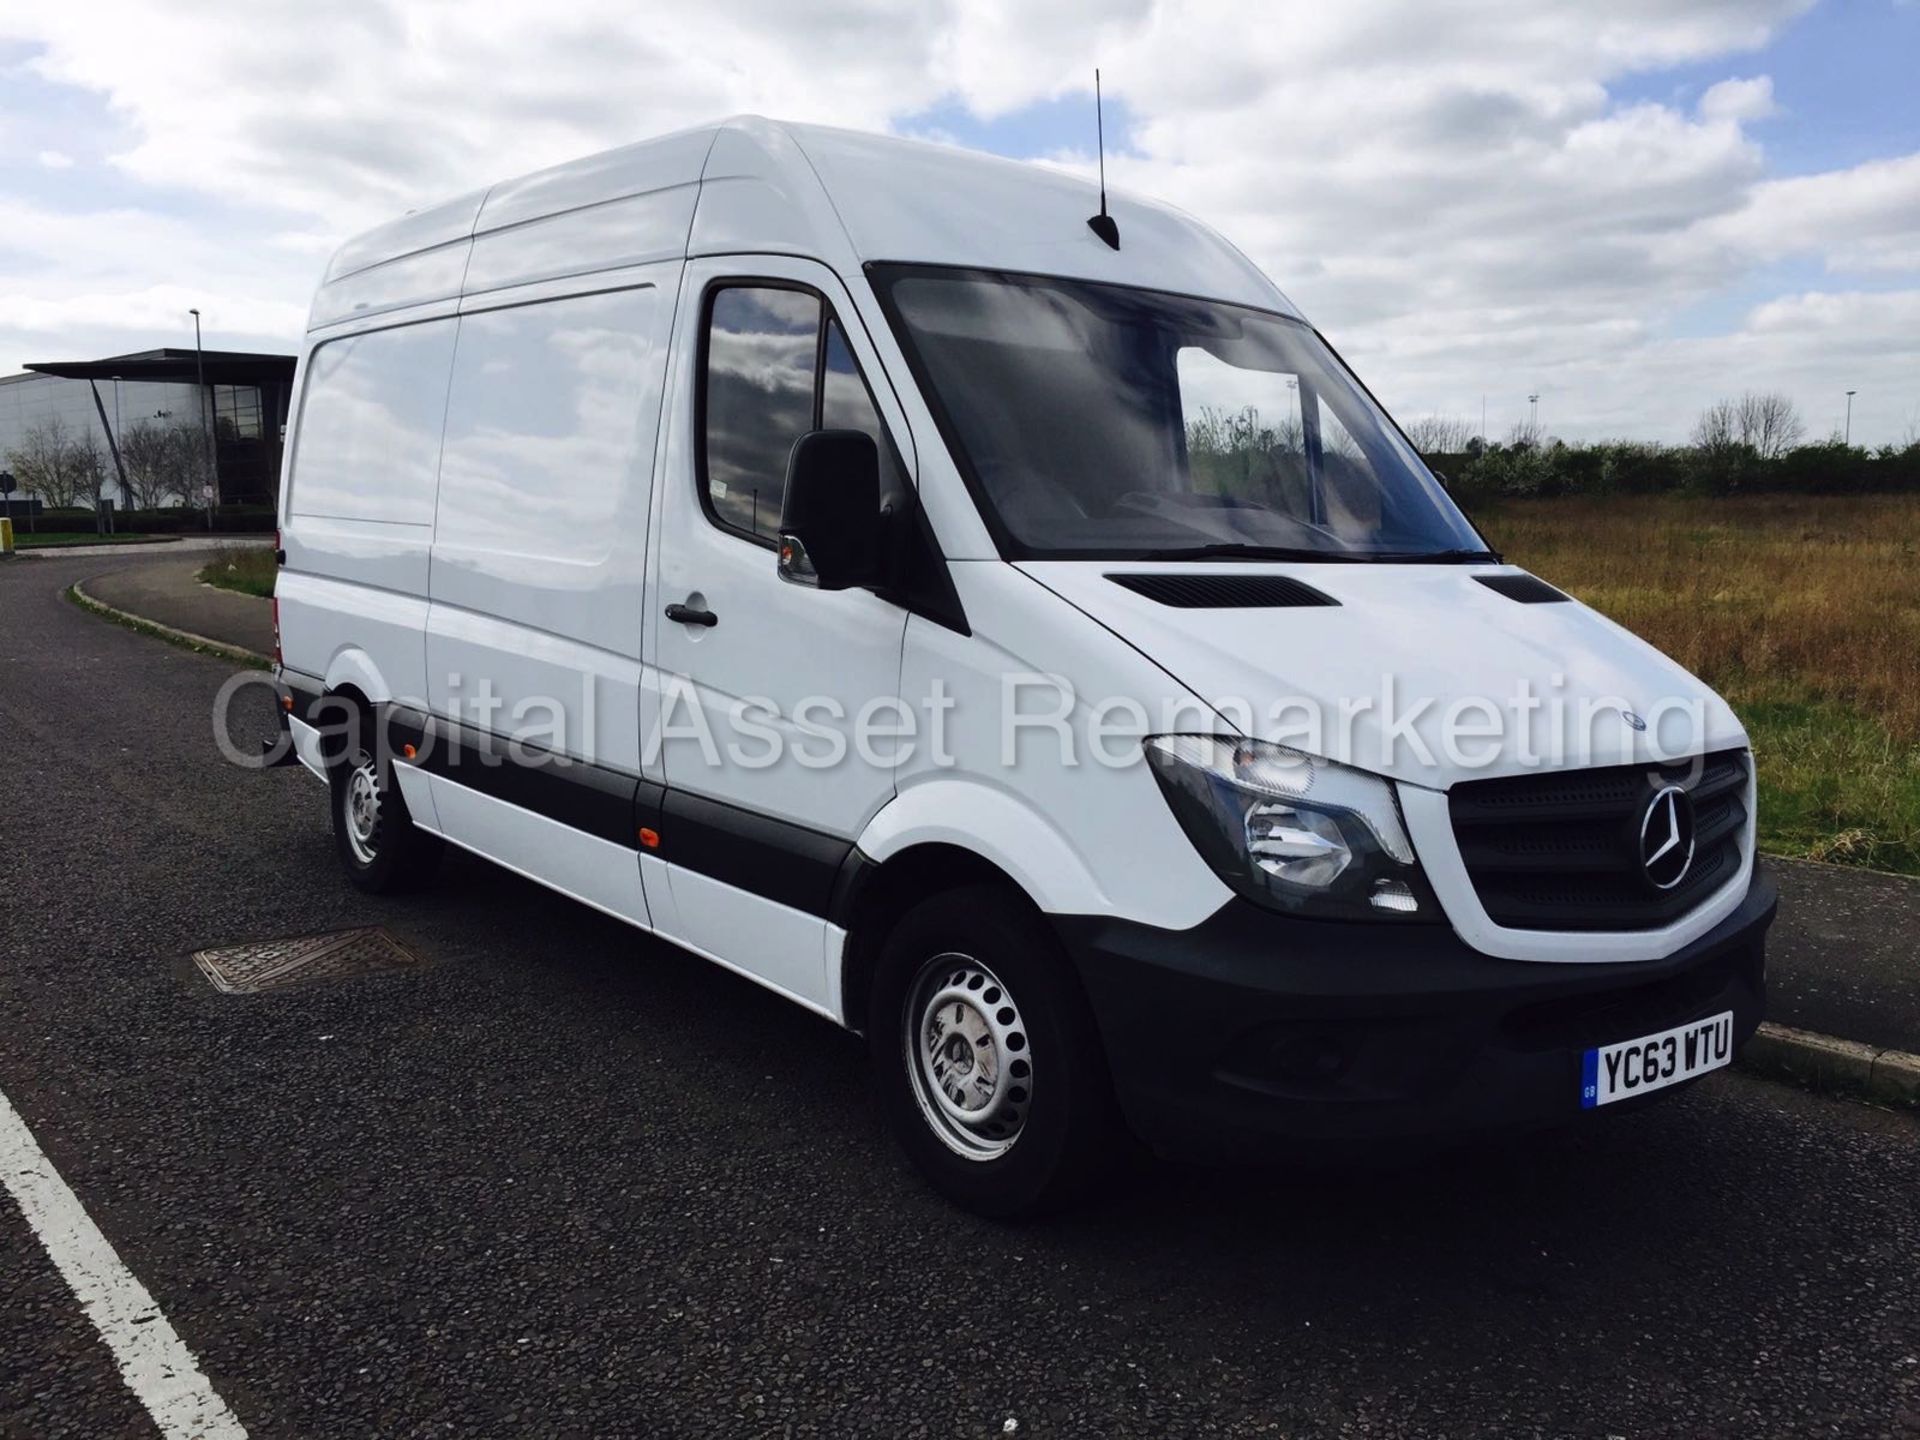 MERCEDES SPRINTER 313CDI "130BHP - 6 SPEED" FACELIFT MODEL / NEW SHAPE (2014 YEAR) 1 OWNER